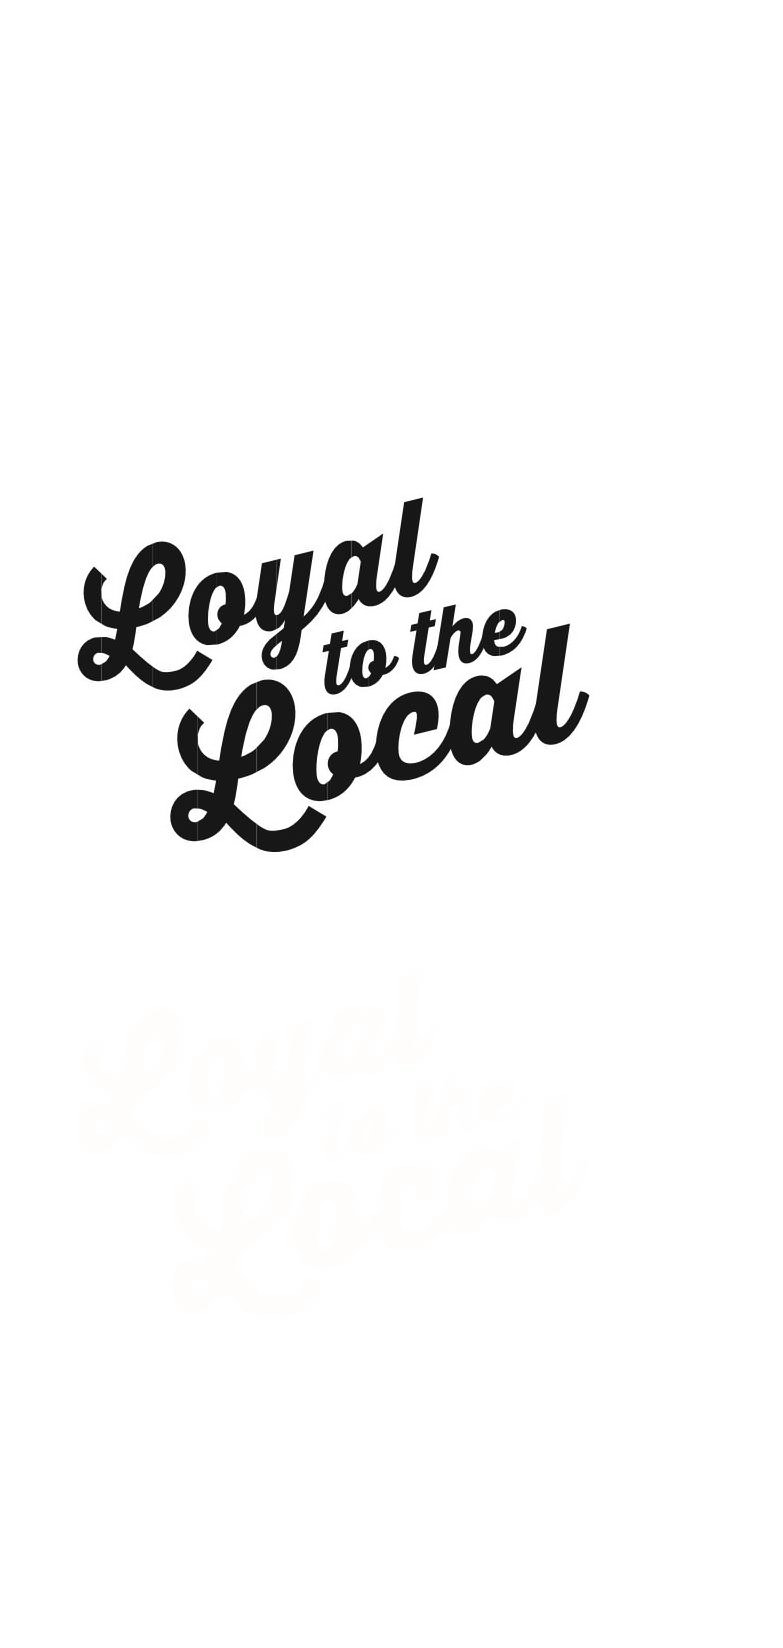  LOYAL TO THE LOCAL